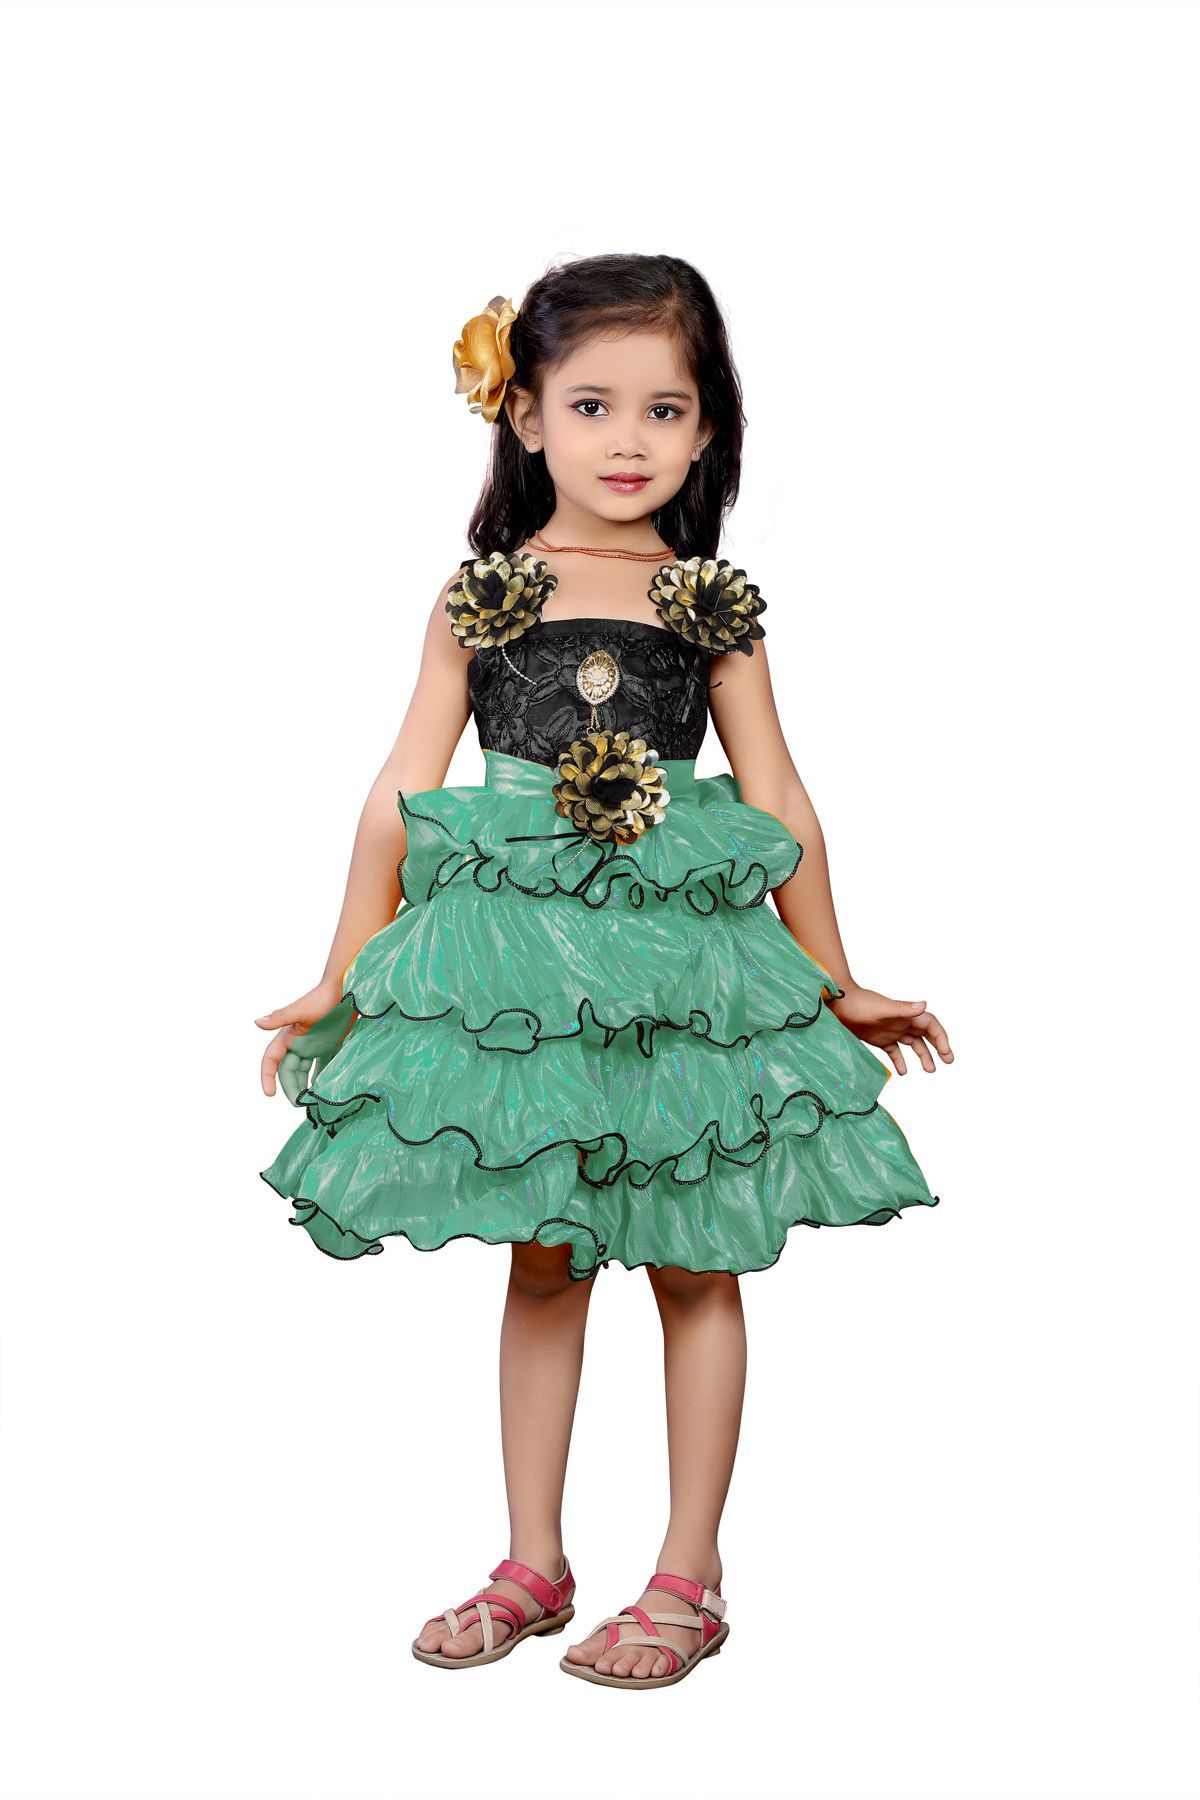 green colour baby frock